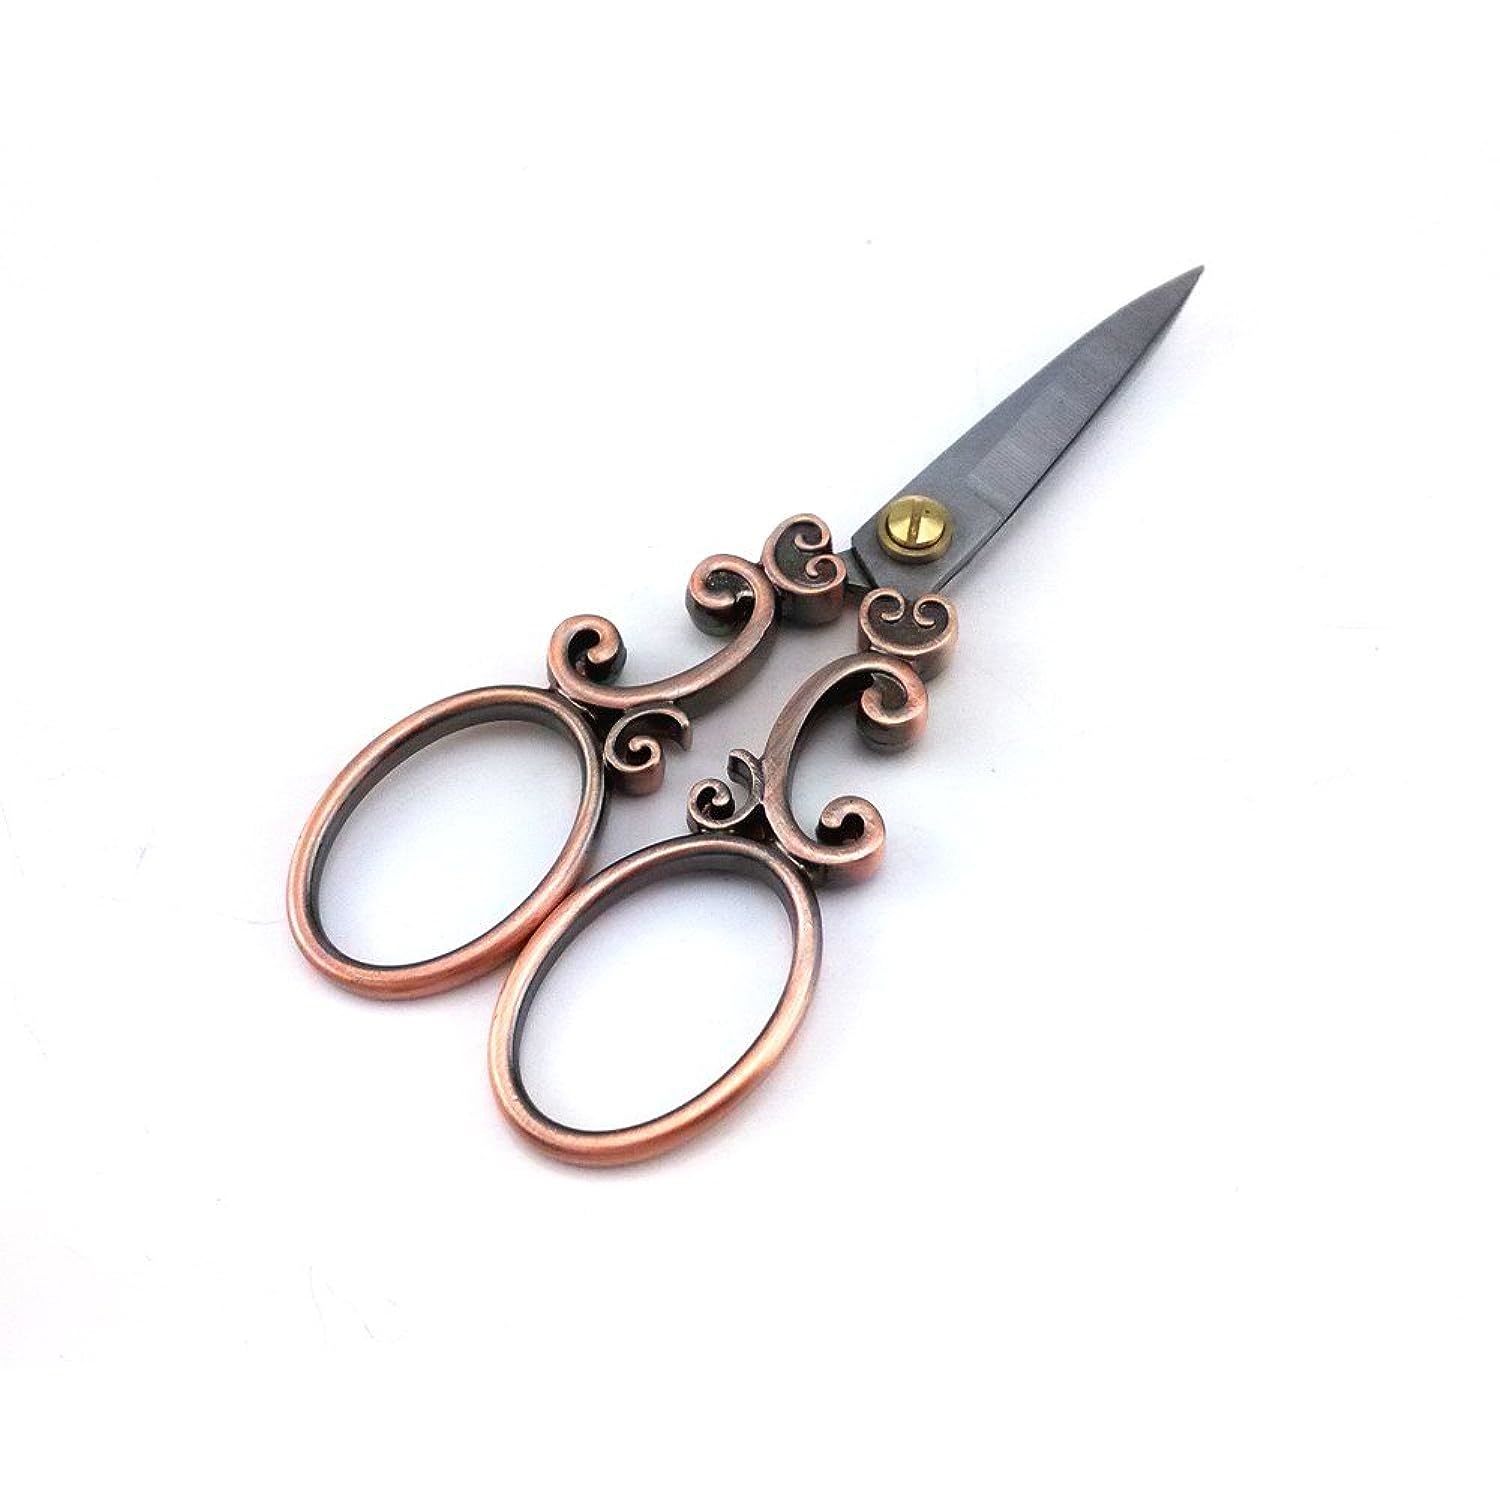  Pinking Shears Scissors for Fabric Paper Cutting, 9